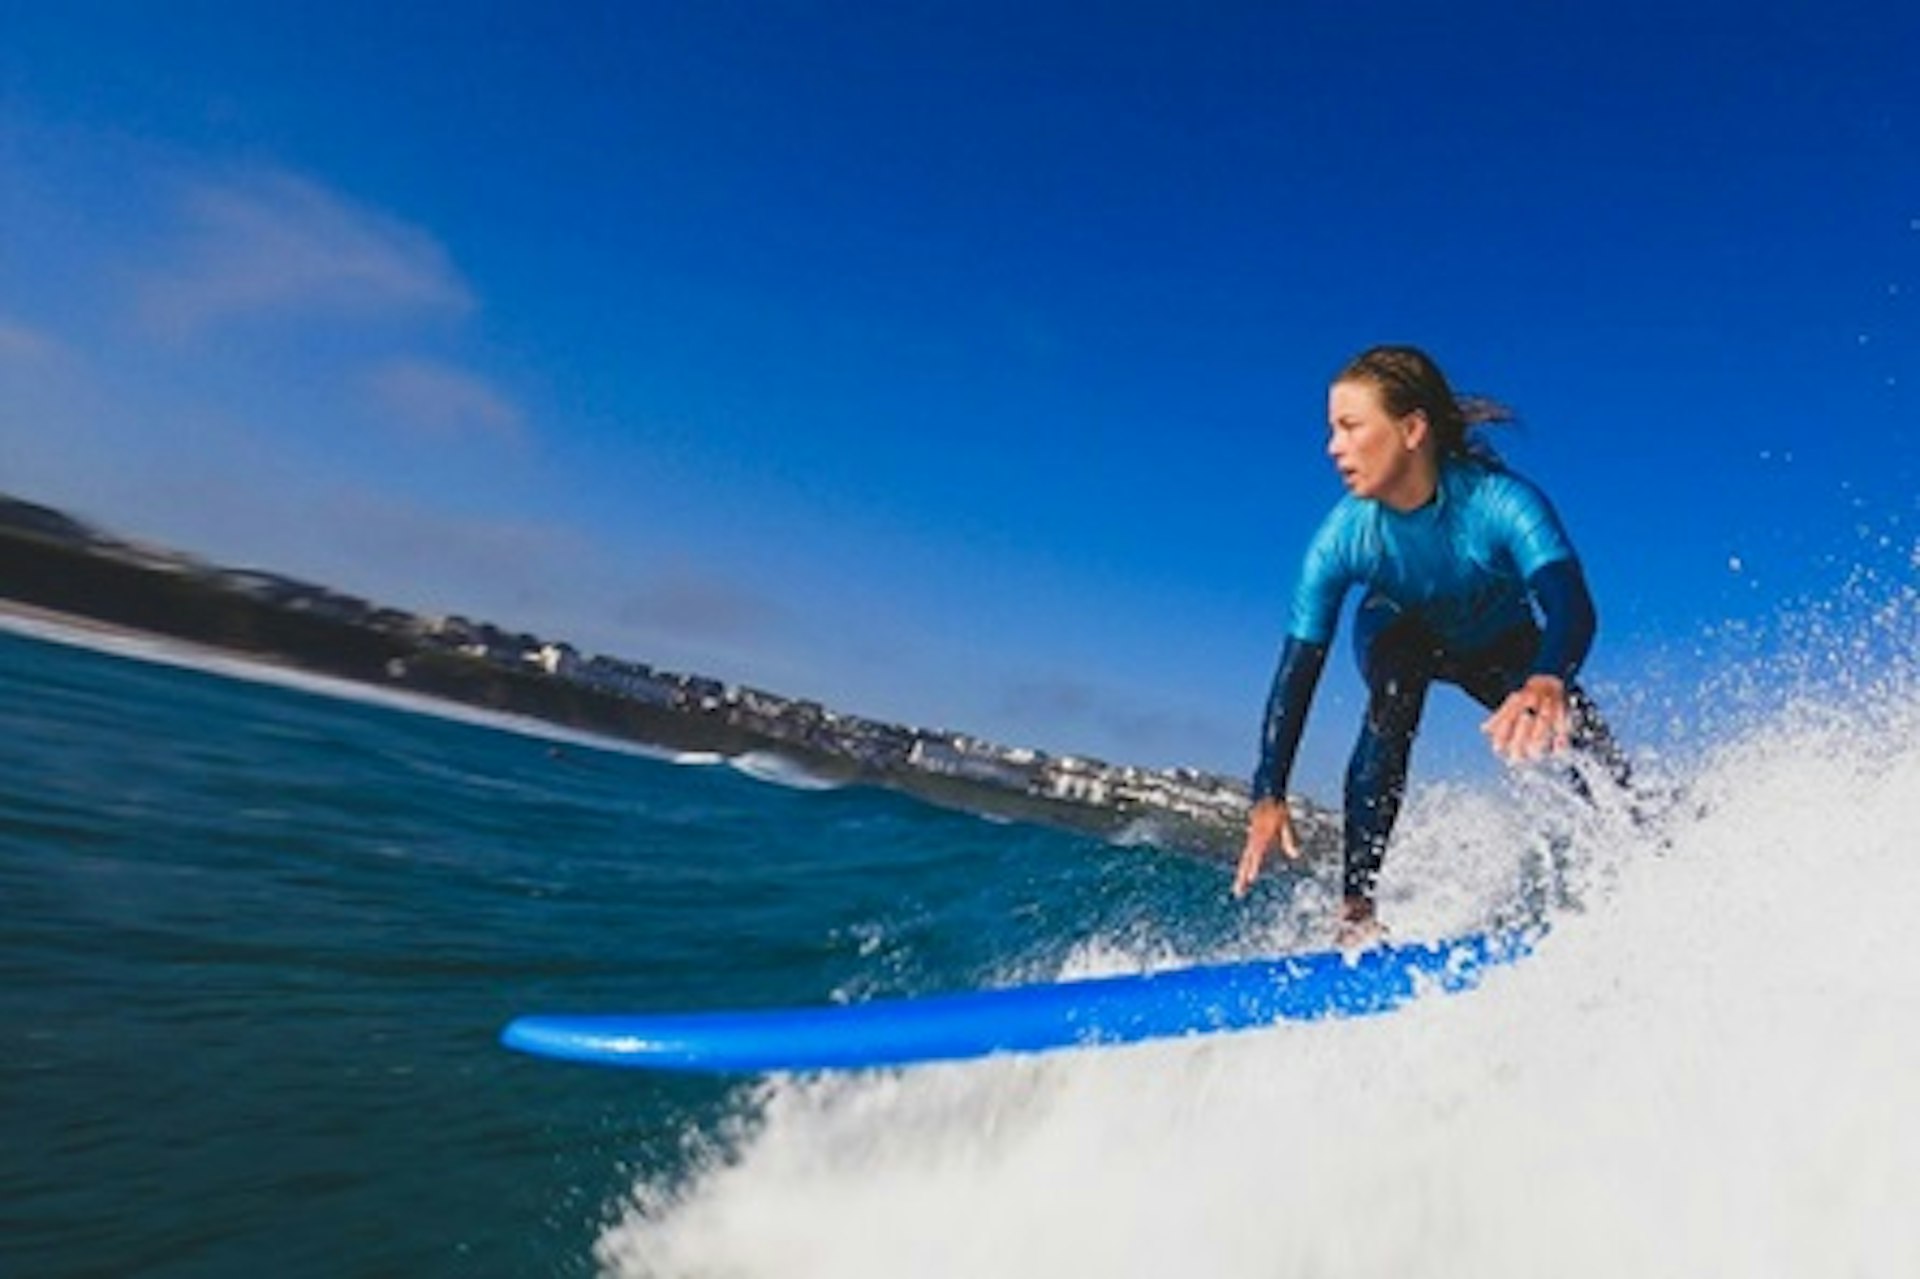 Weekend of Surf Coaching in Newquay with Women + Waves 2